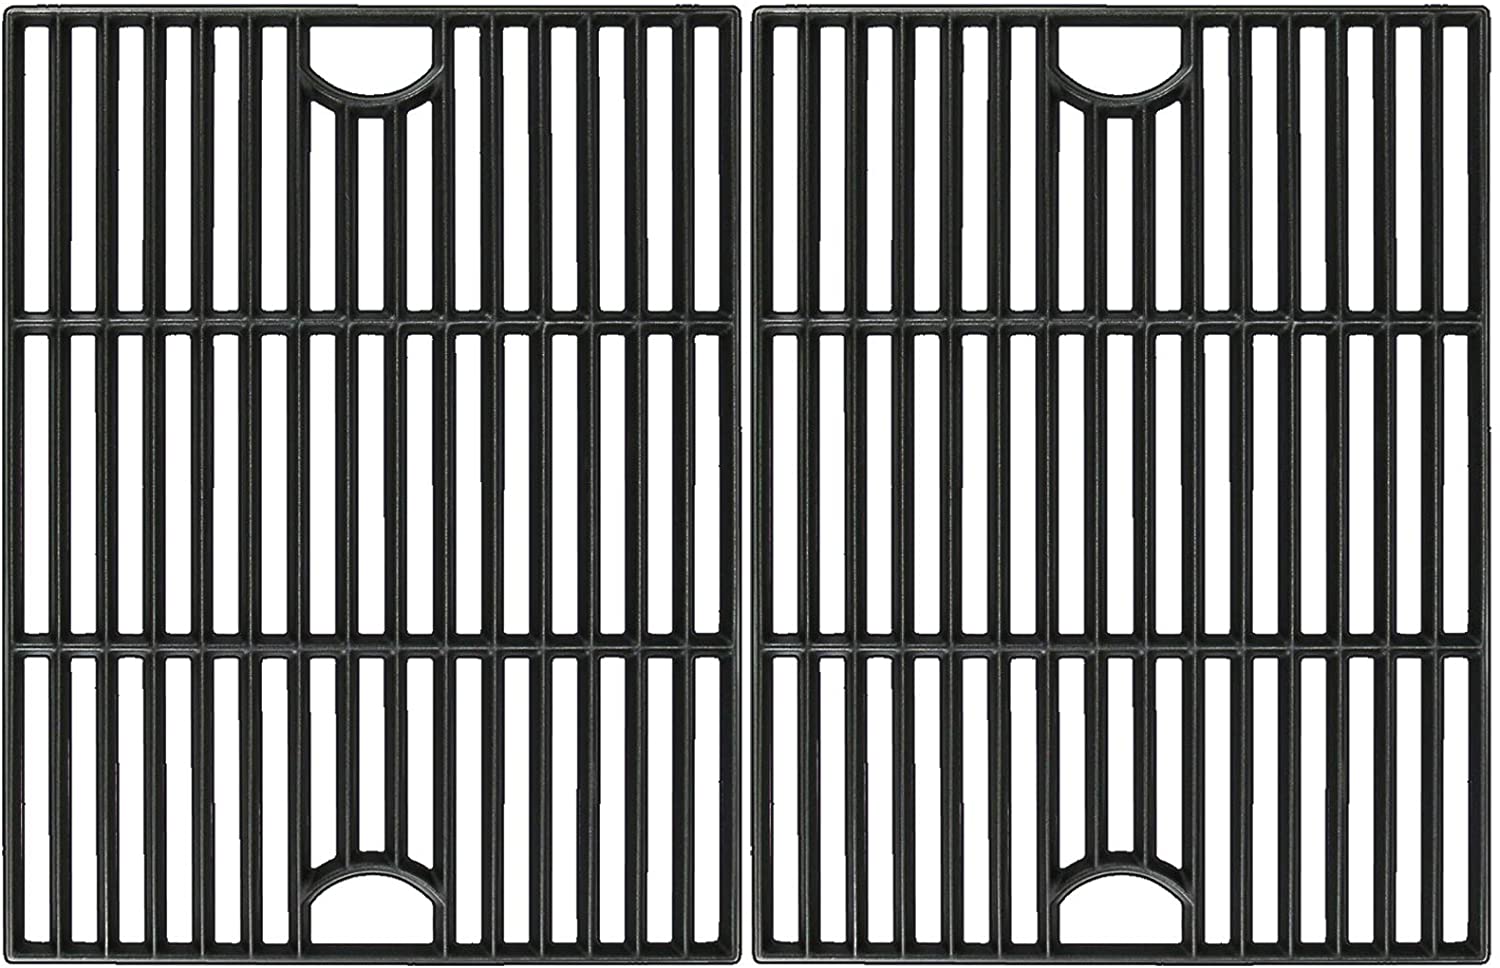 BBQ Griddle Plate for Nexgrill 720-0783E, 720-0783H, 720-0783S, 720-0783W, 720-0783B, 720-0783A, 720-0783C, 720-0783 GAS Grills